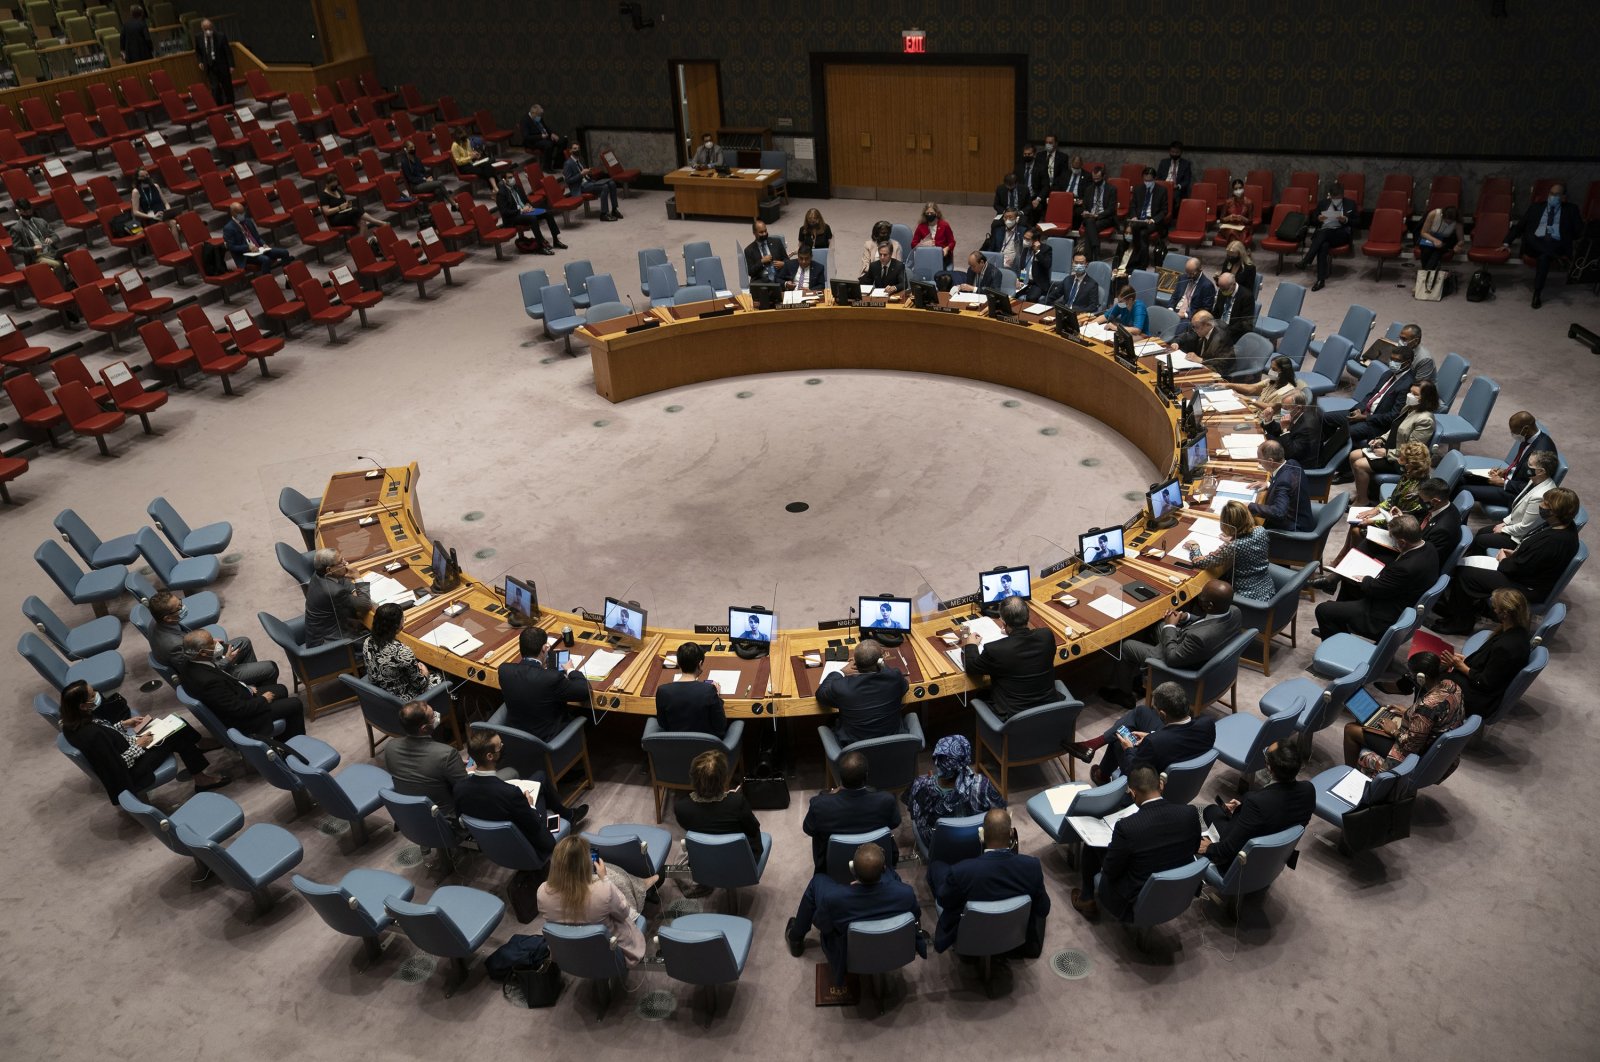 A meeting of the United Nations Security Council is held during the 76th Session of the U.N. General Assembly, New York, U.S., Sept. 23, 2021. (Getty Images)